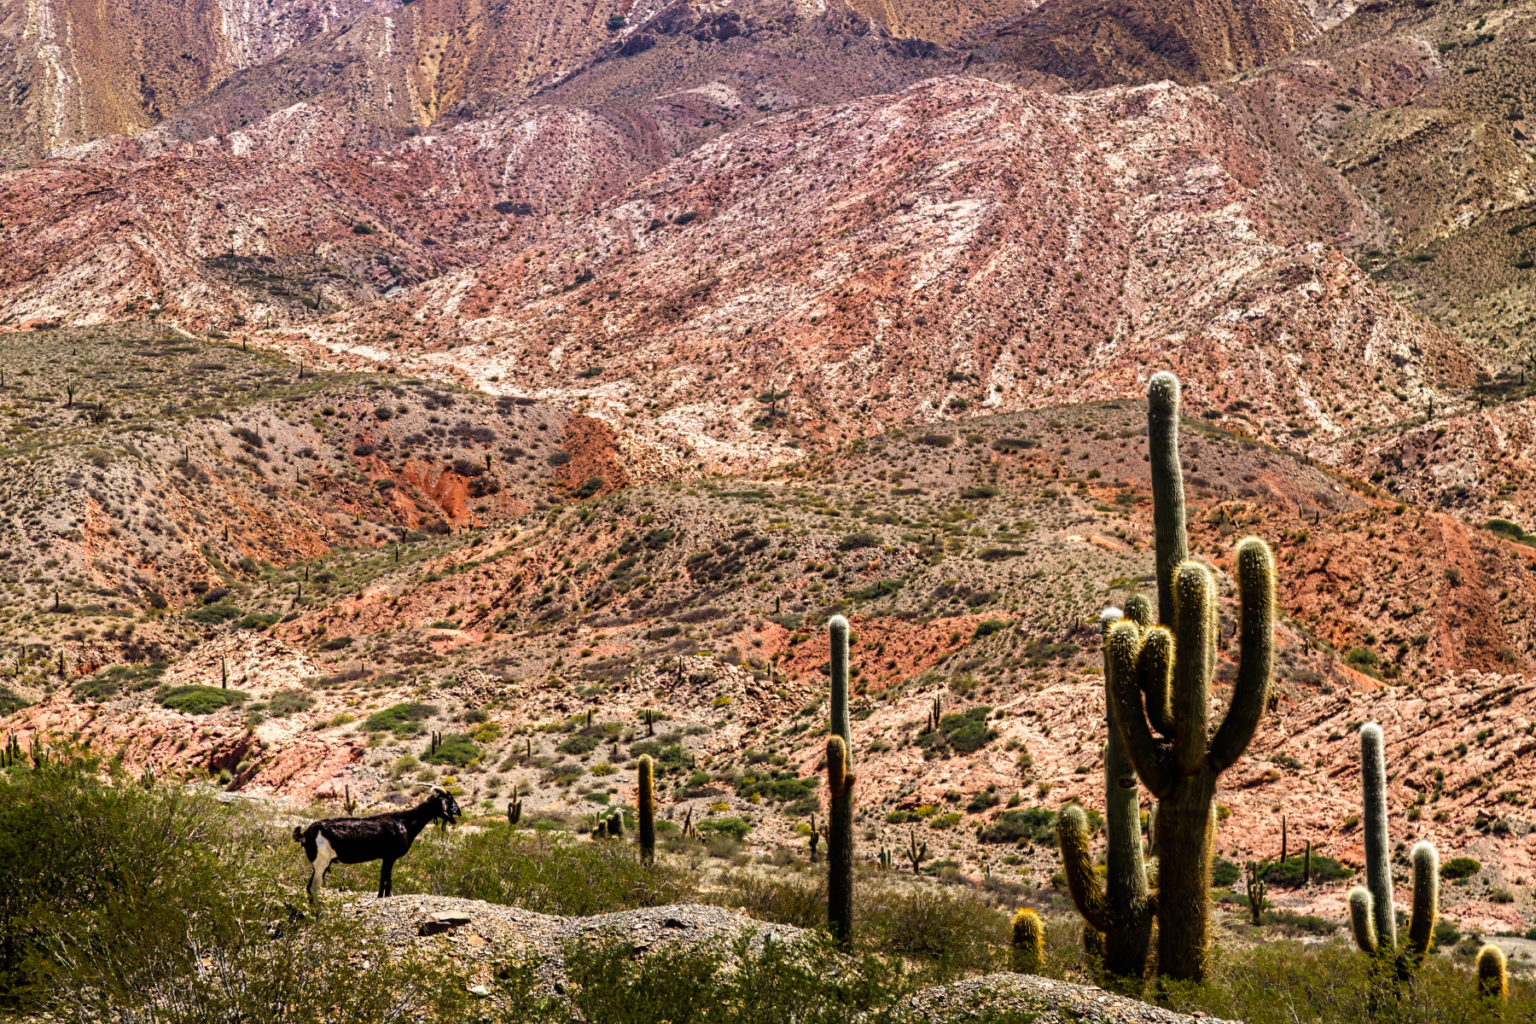 Goat and cacti in front of colorful desert mountains